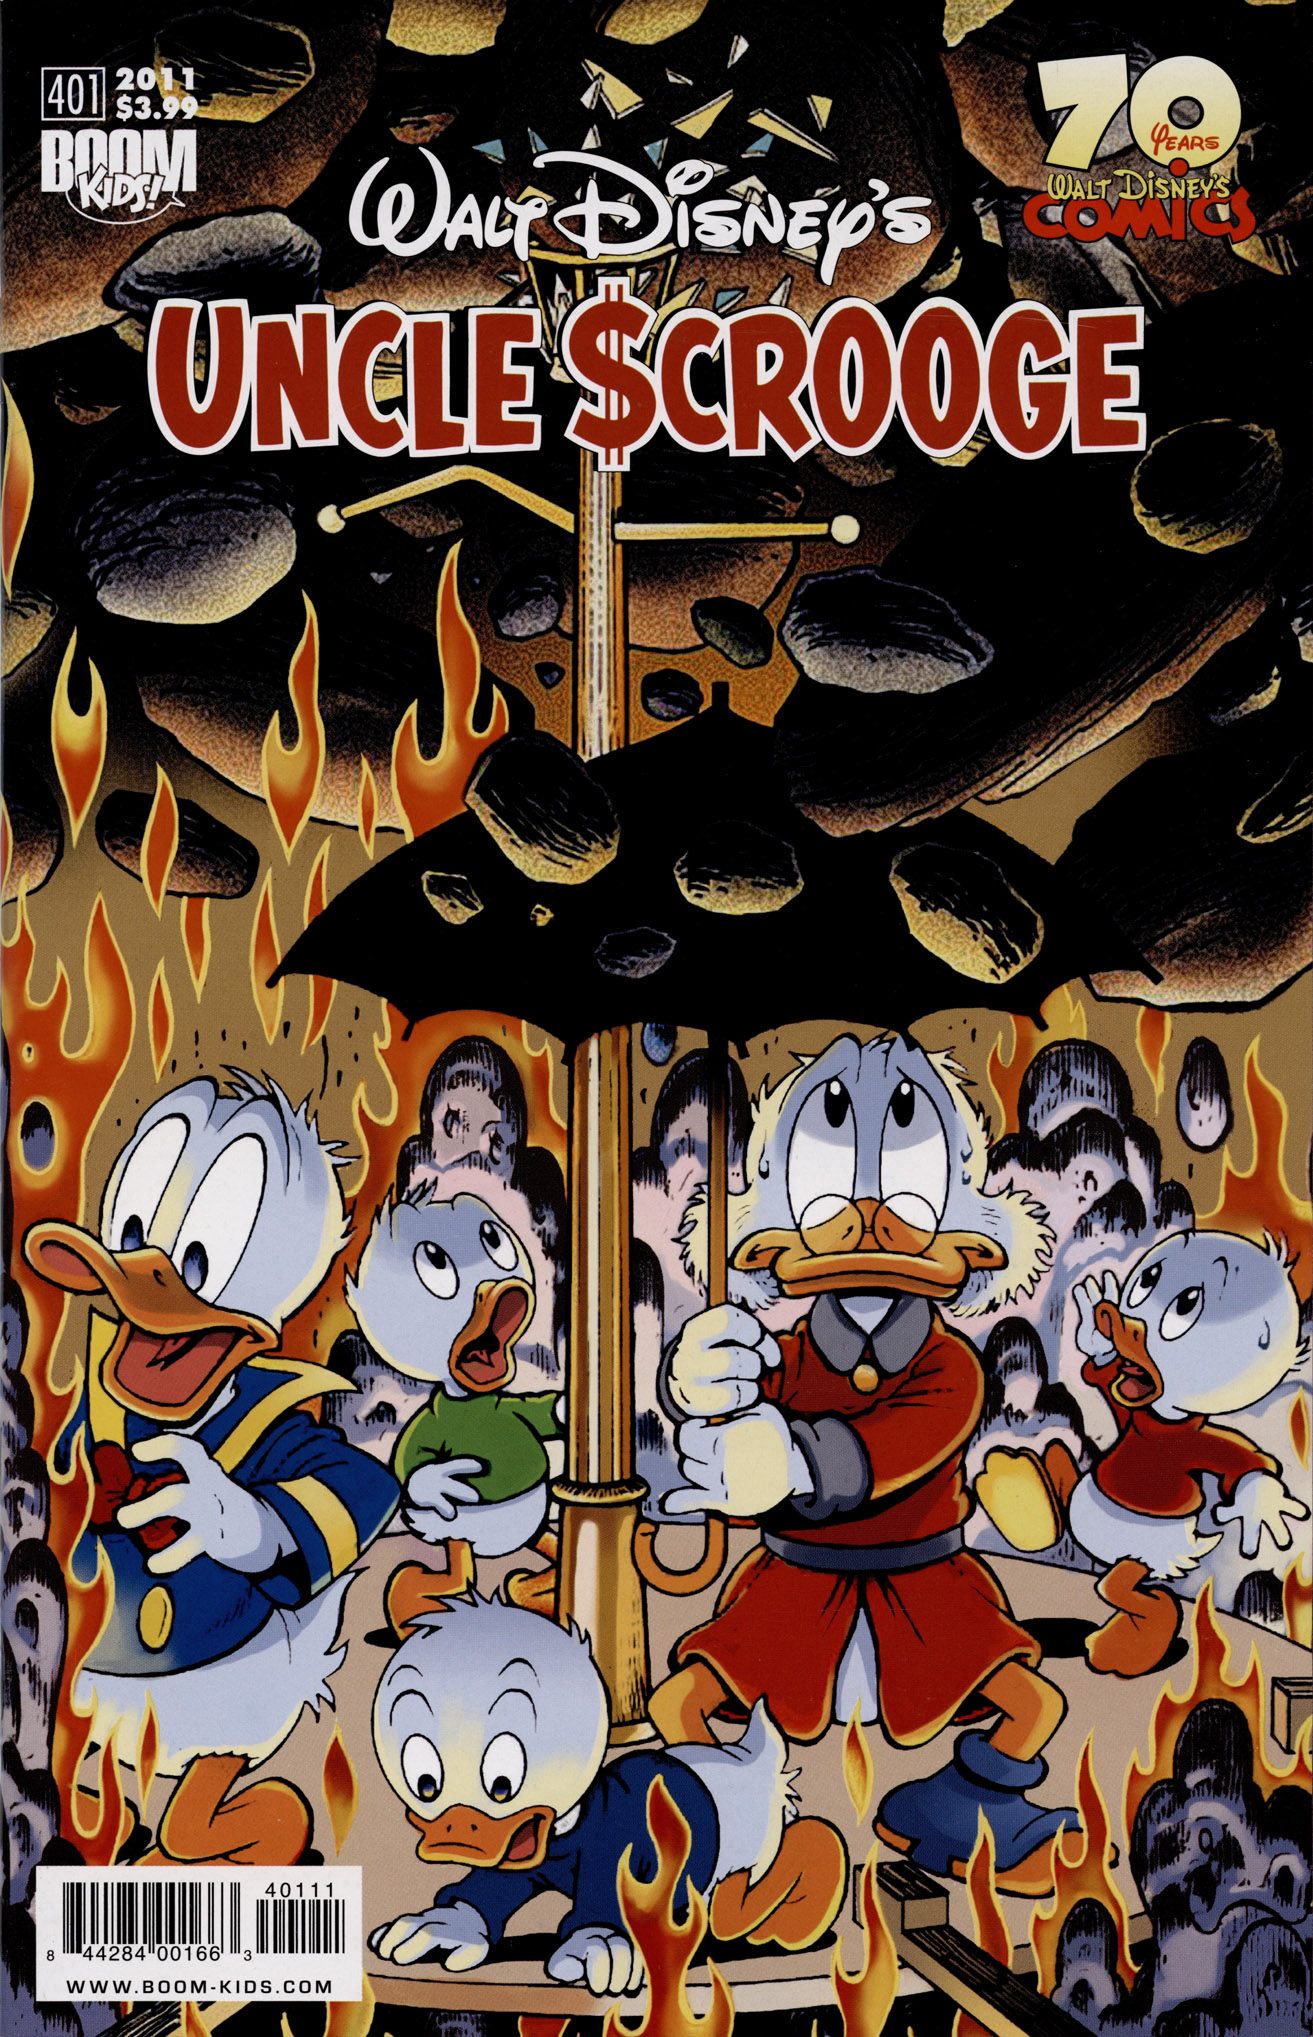 Read online Uncle Scrooge (1953) comic -  Issue #401 - 1